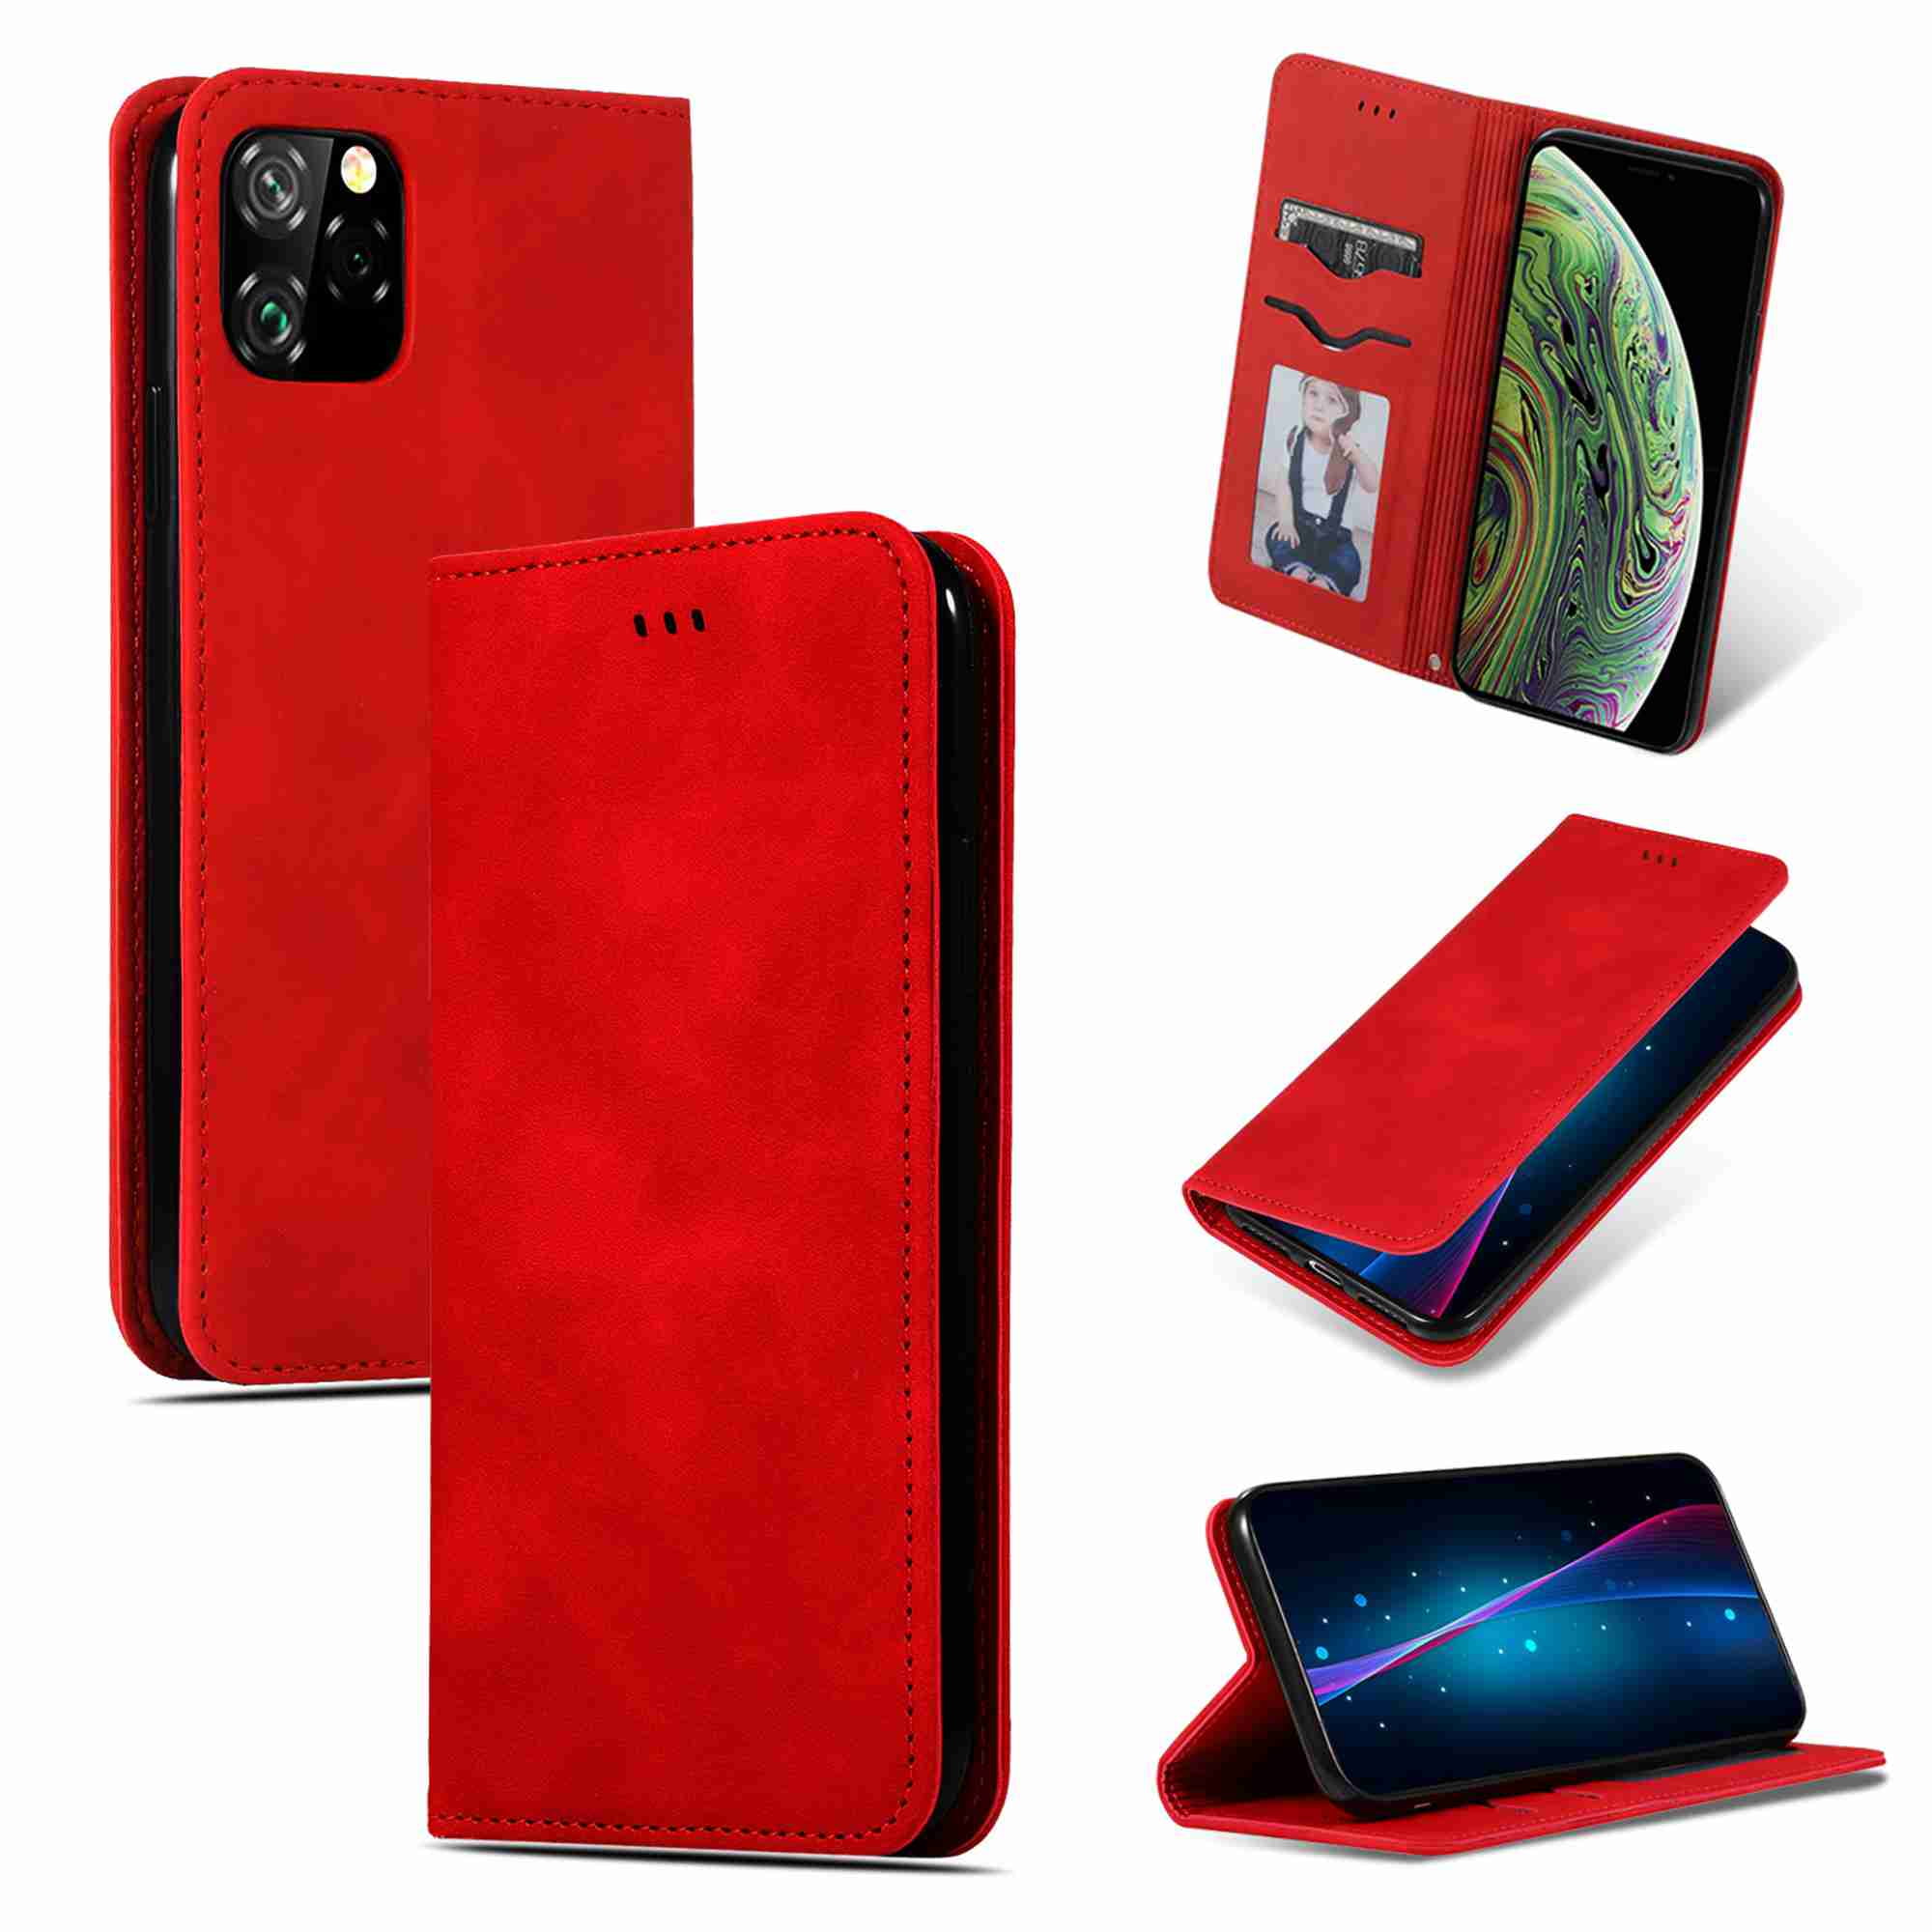 Shockproof Leather Flip Case for iPhone 11 Pro Business Wallet Cover Compatible with iPhone 11 Pro Smartphone 